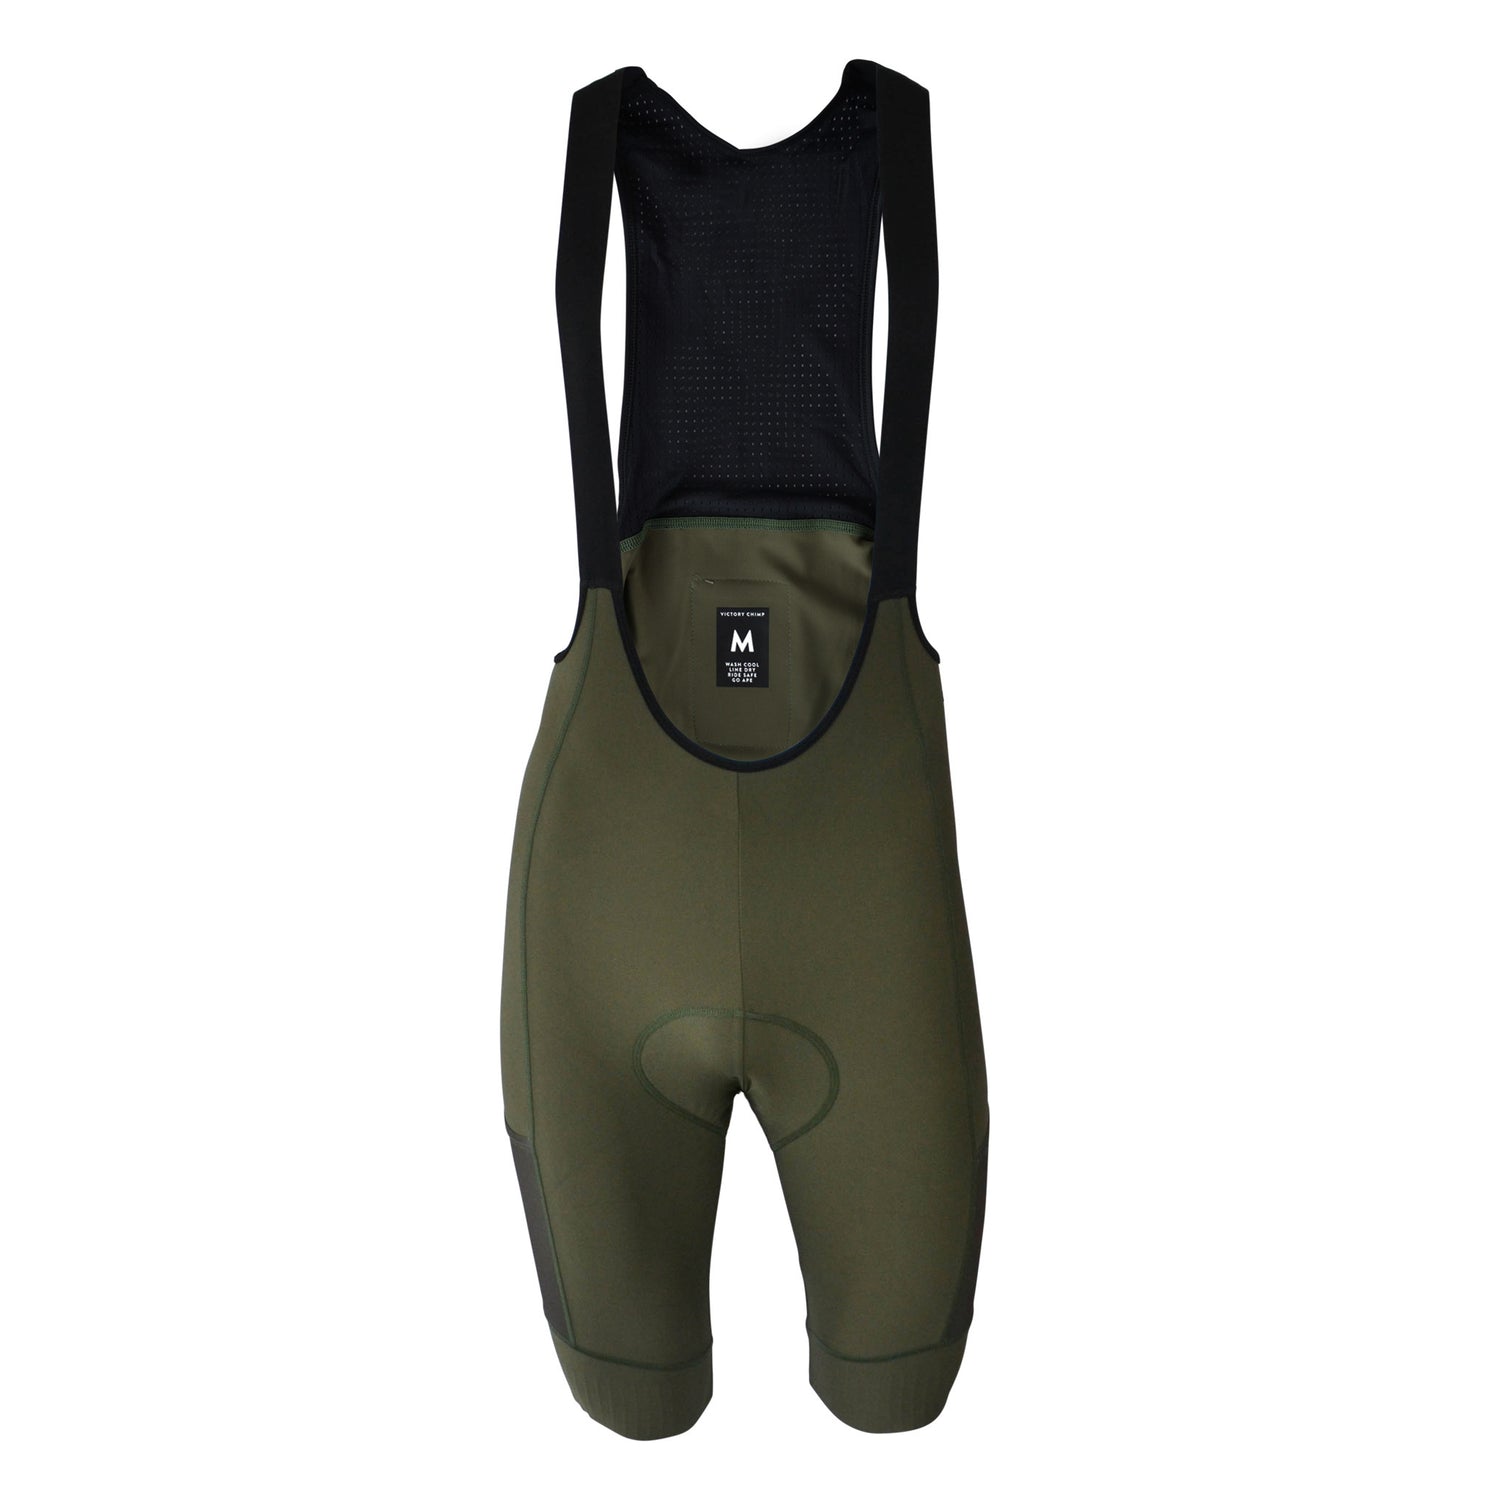 Out There Cargo Bib Shorts (Olive) | Cycling Shorts Men | Victory Chimp